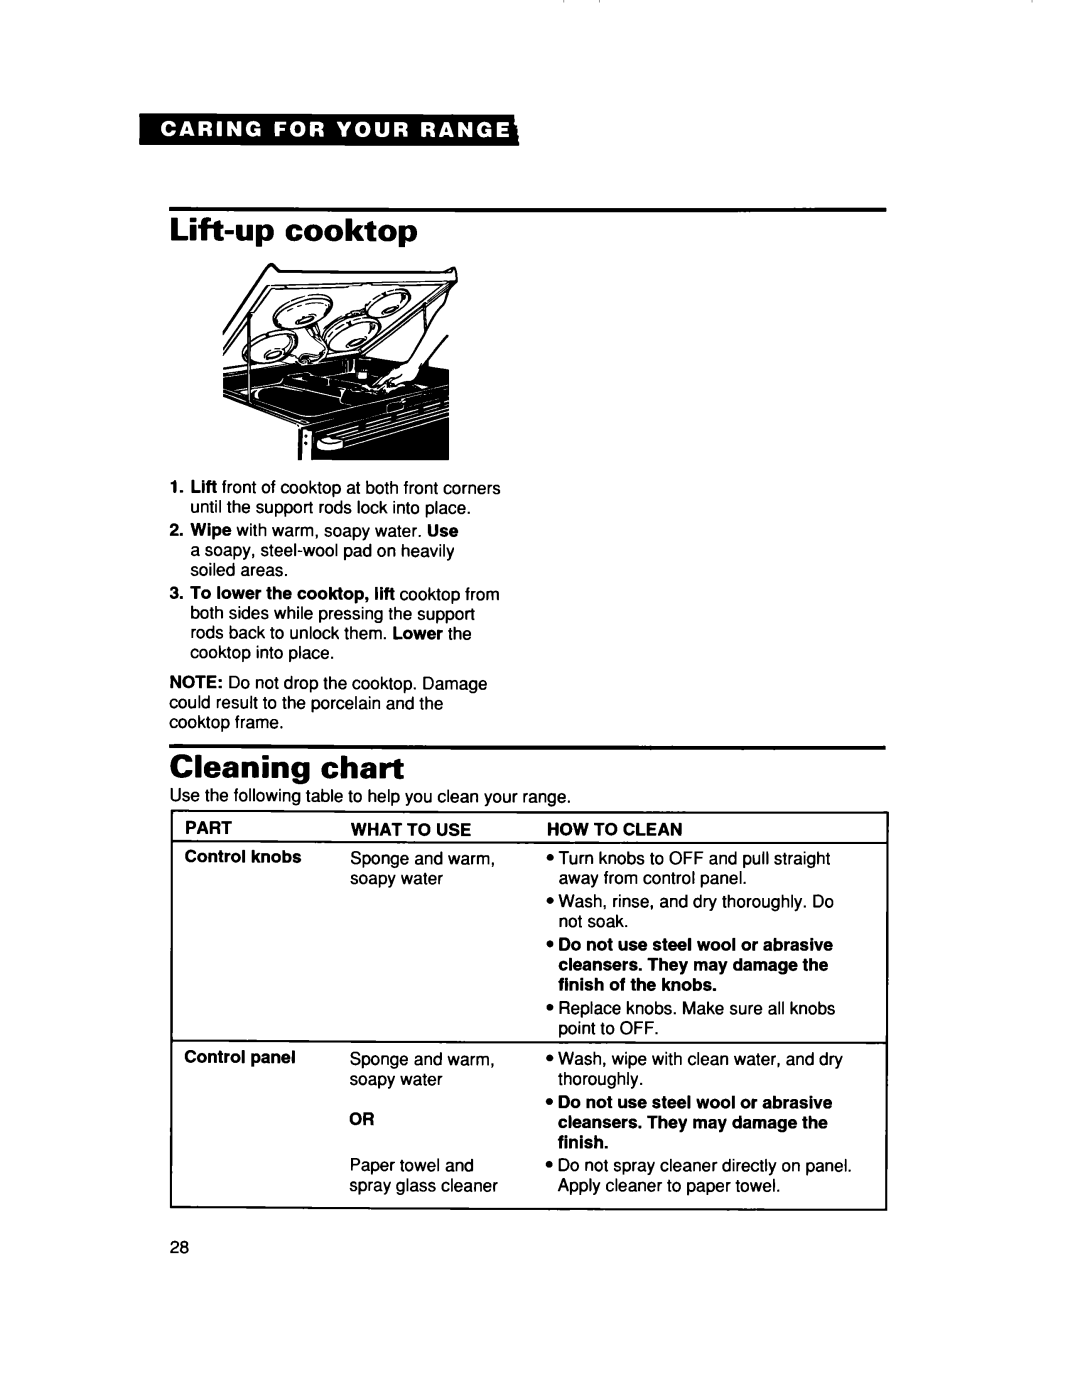 Whirlpool TER50W0D warranty Lift-upcooktop, Cleaning chart 